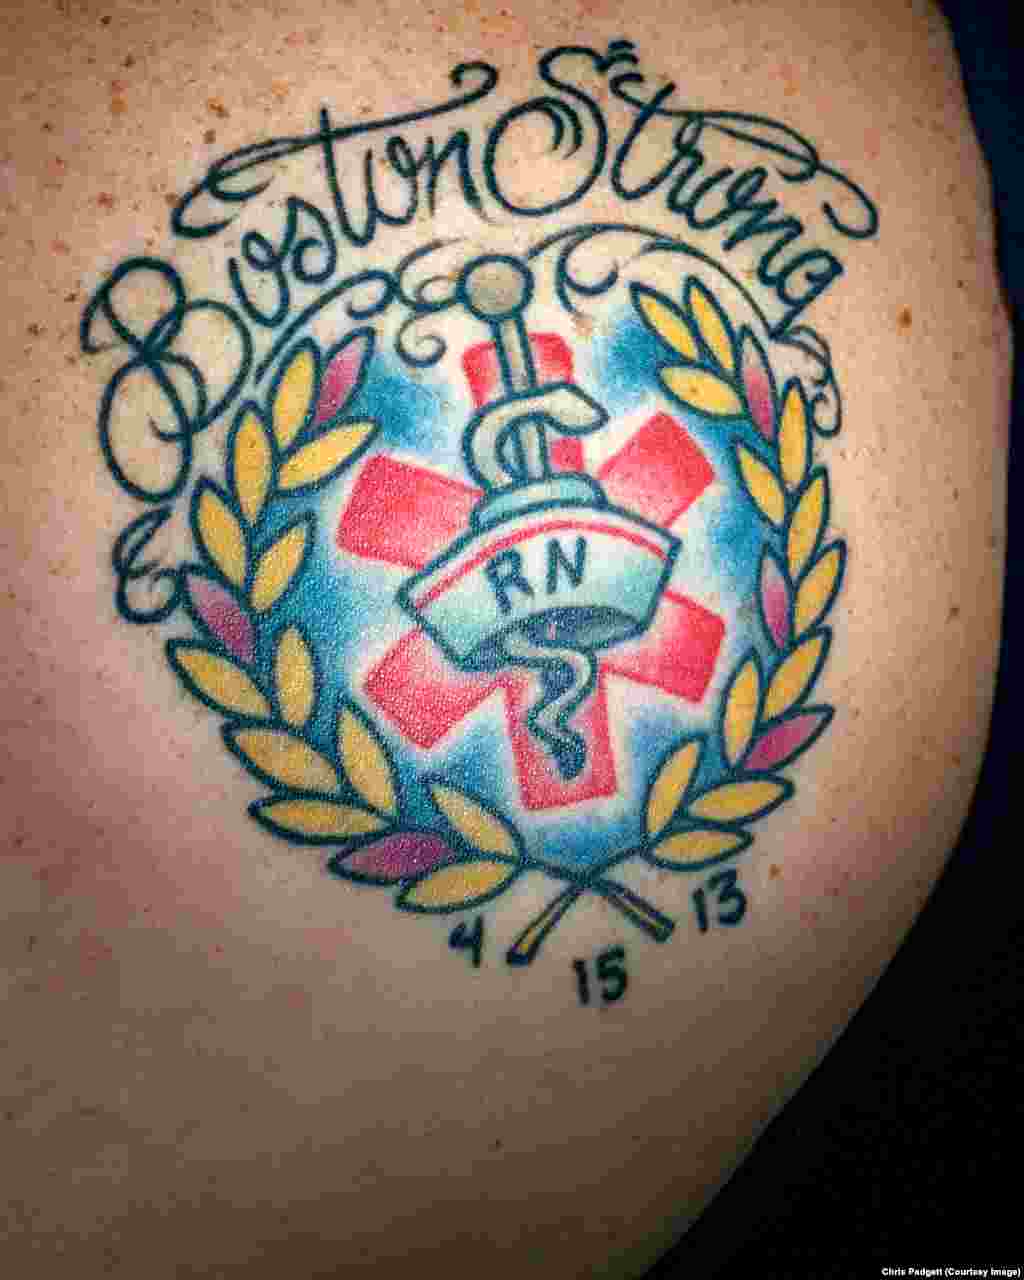 Rachel and several other nurses from the Lowell General Hospital received matching tattoos. They all offered medical help at the finish line in the aftermath of the marathon bombing.